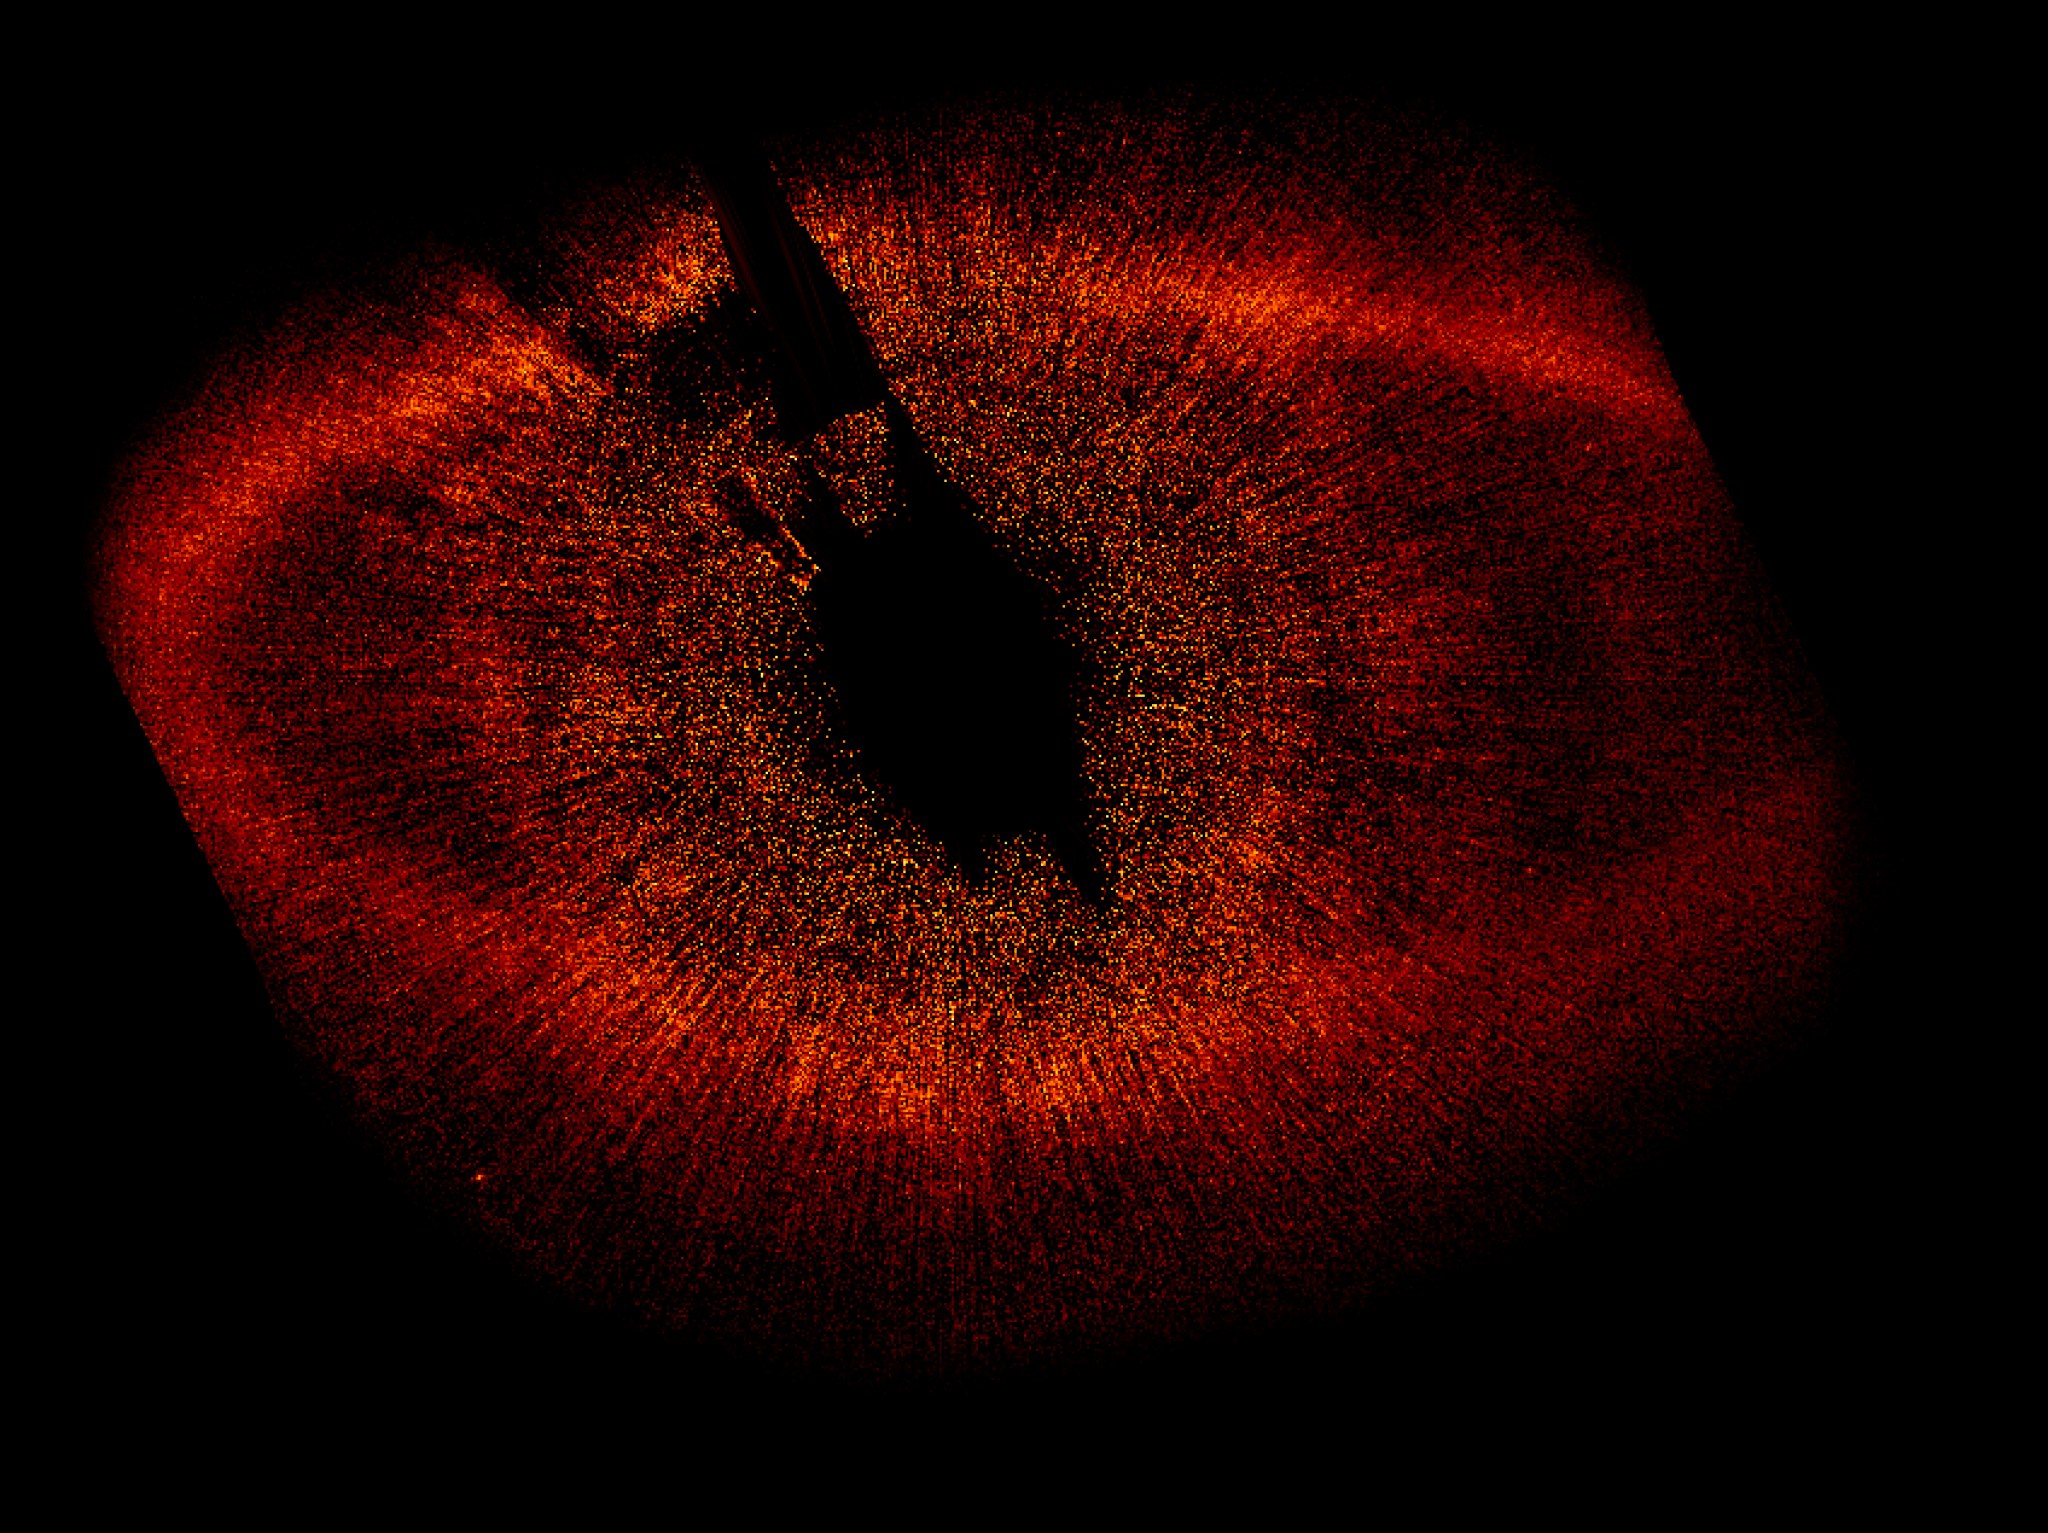 The star Fomalhaut with debris disks around it, with is a circle of small red spots.